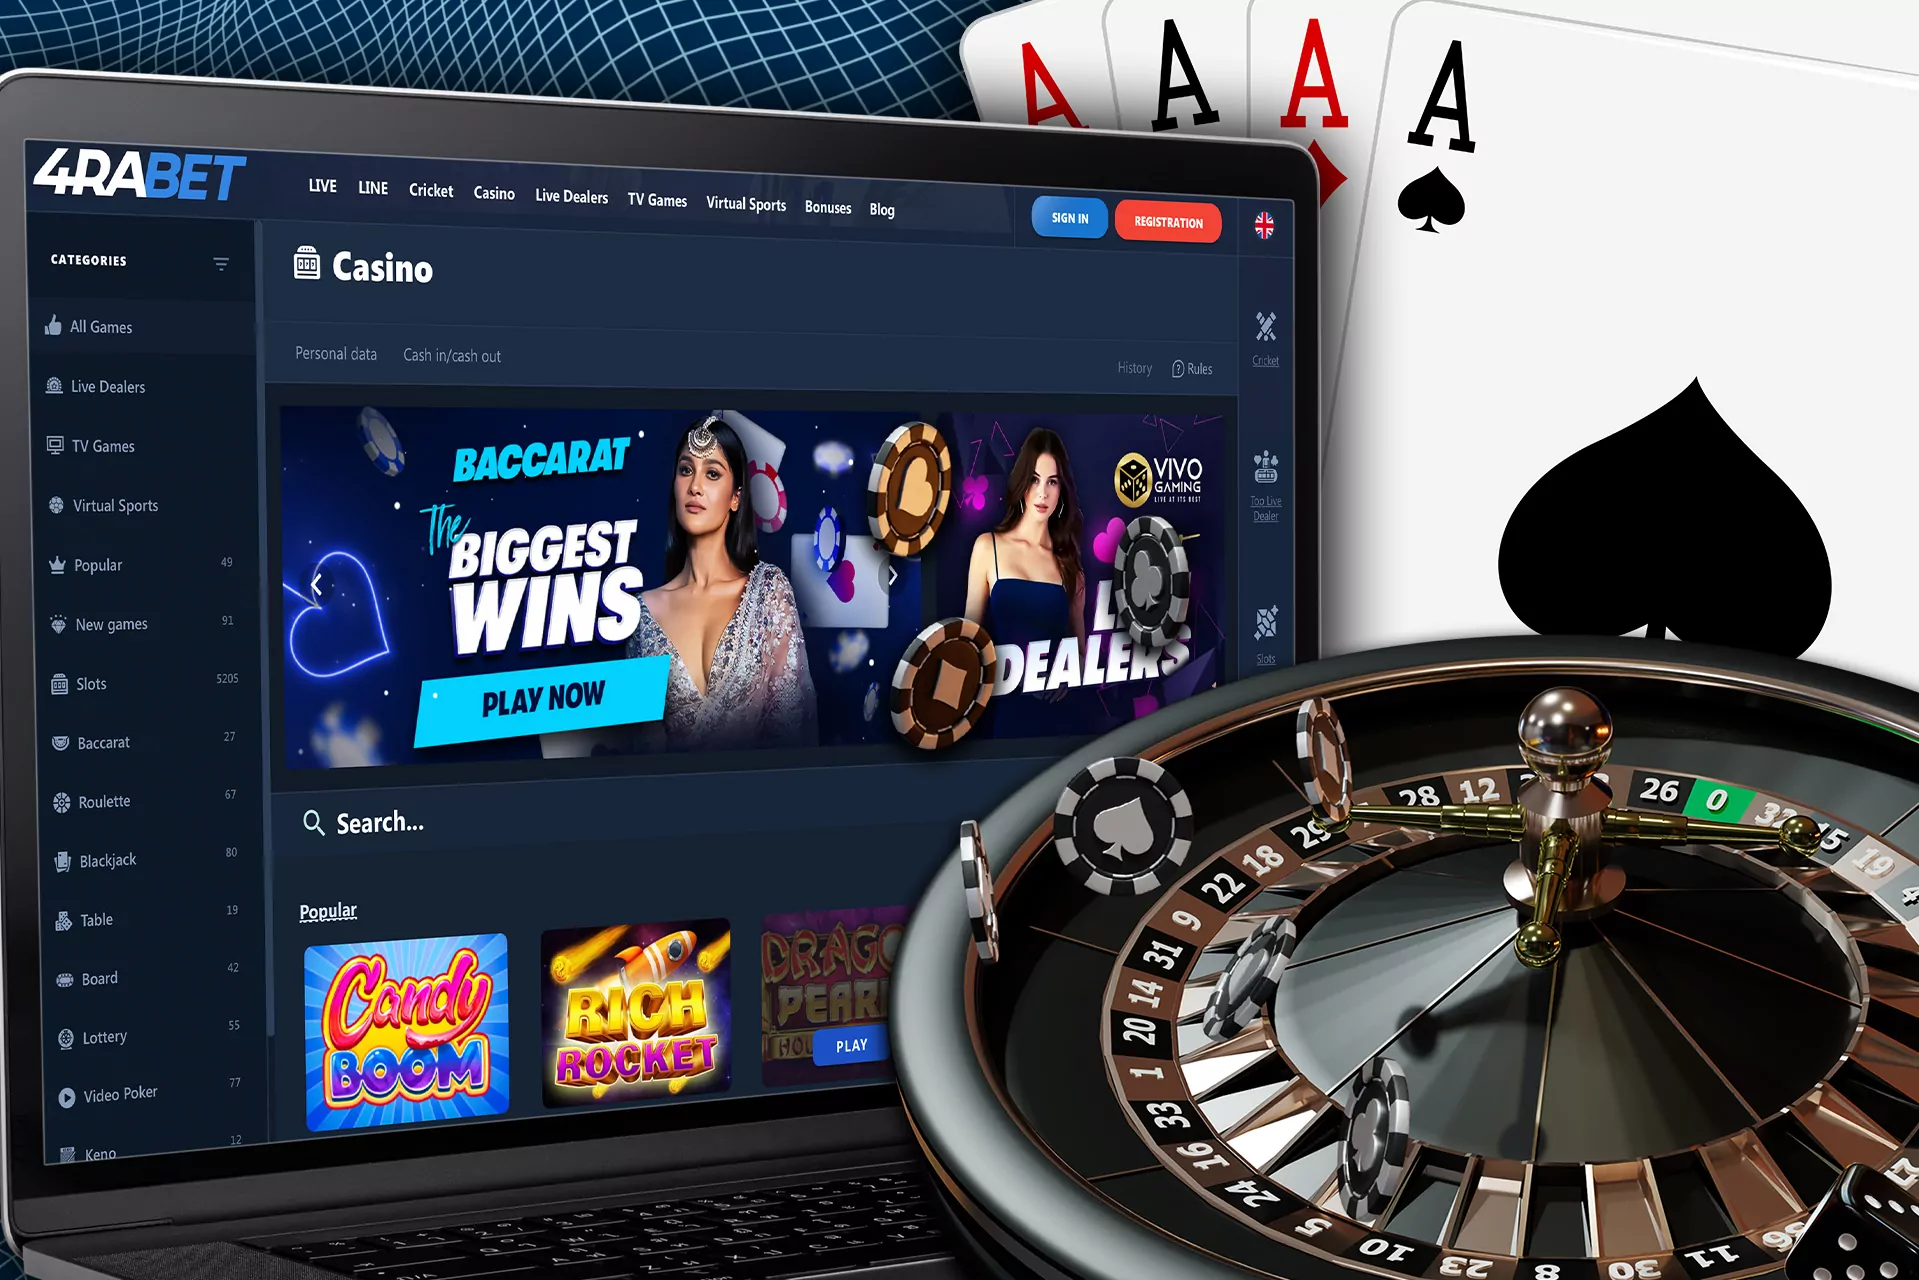 The complete list of available games in the 4Rabet casino is more than a hundred.